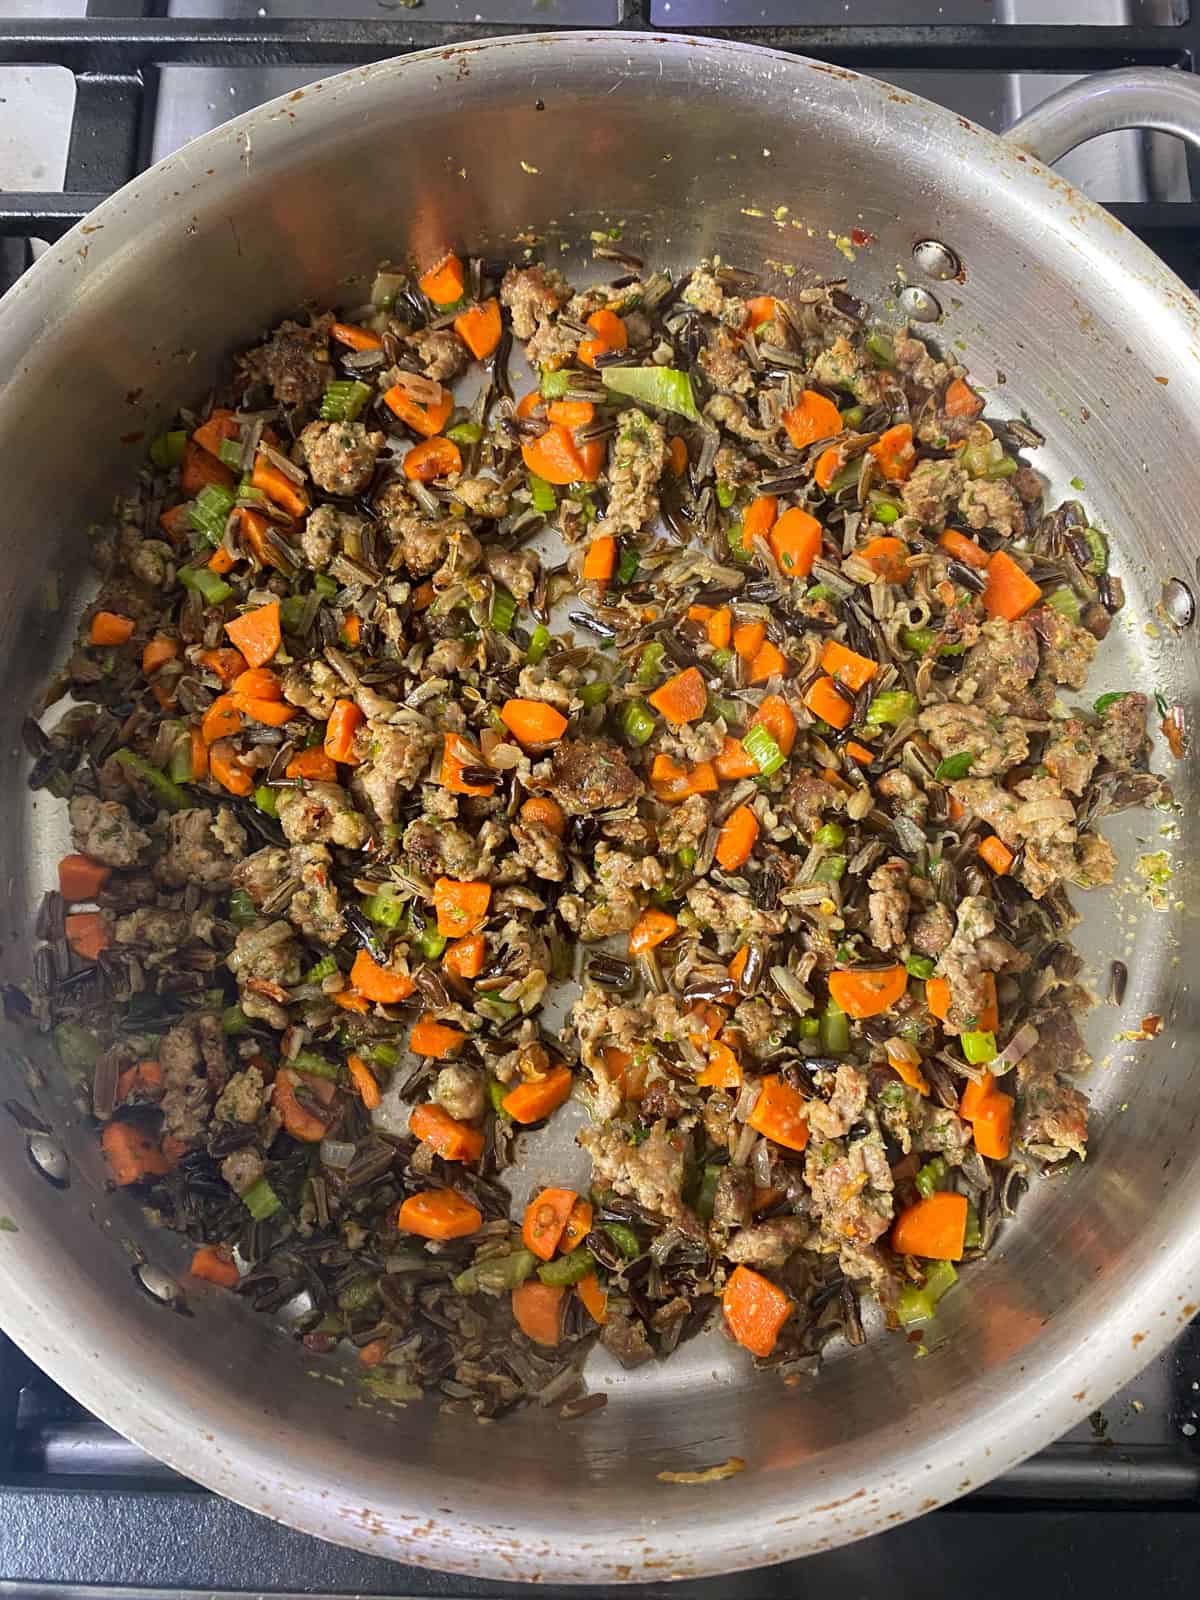 Add the cooked wild rice to the sausage and vegetable mixture and stir to combine.